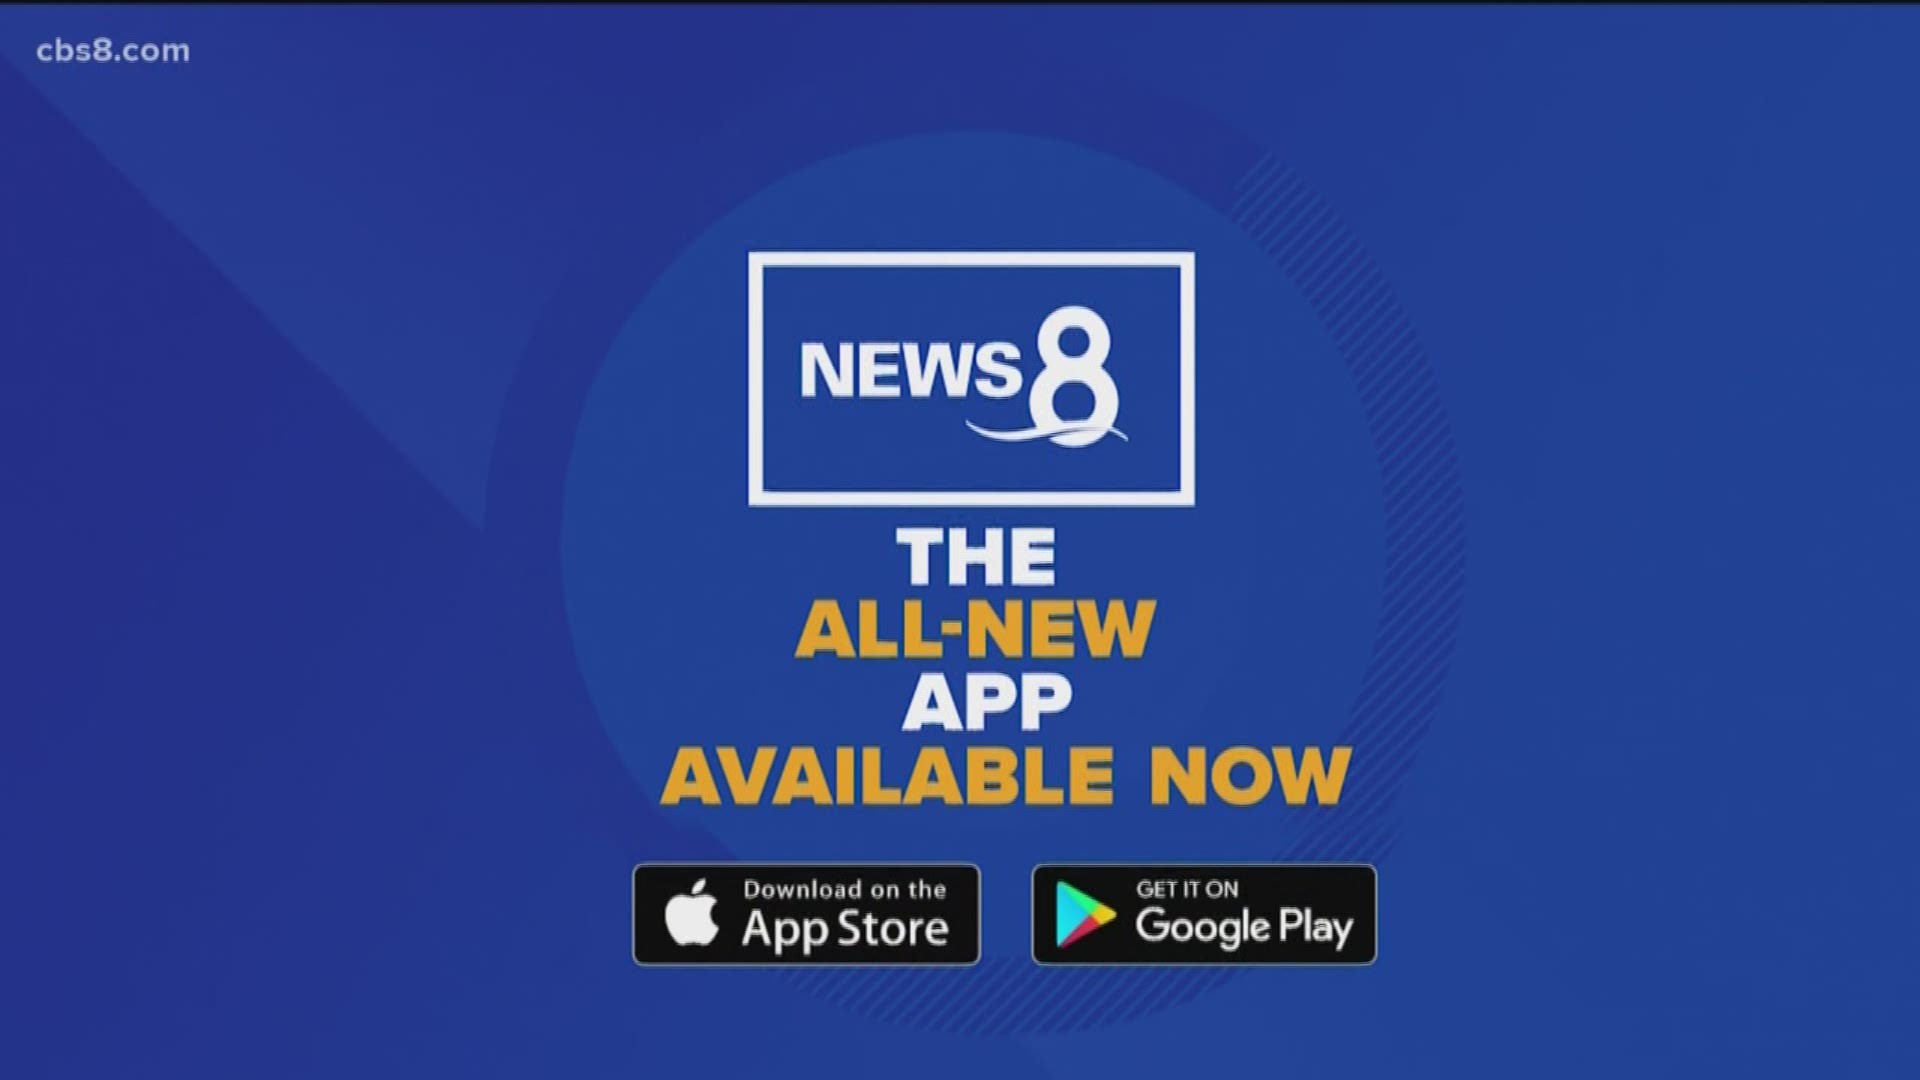 News 8 is excited to share with you that we've launched an all-new and improved mobile app designed for our most important audience: You.